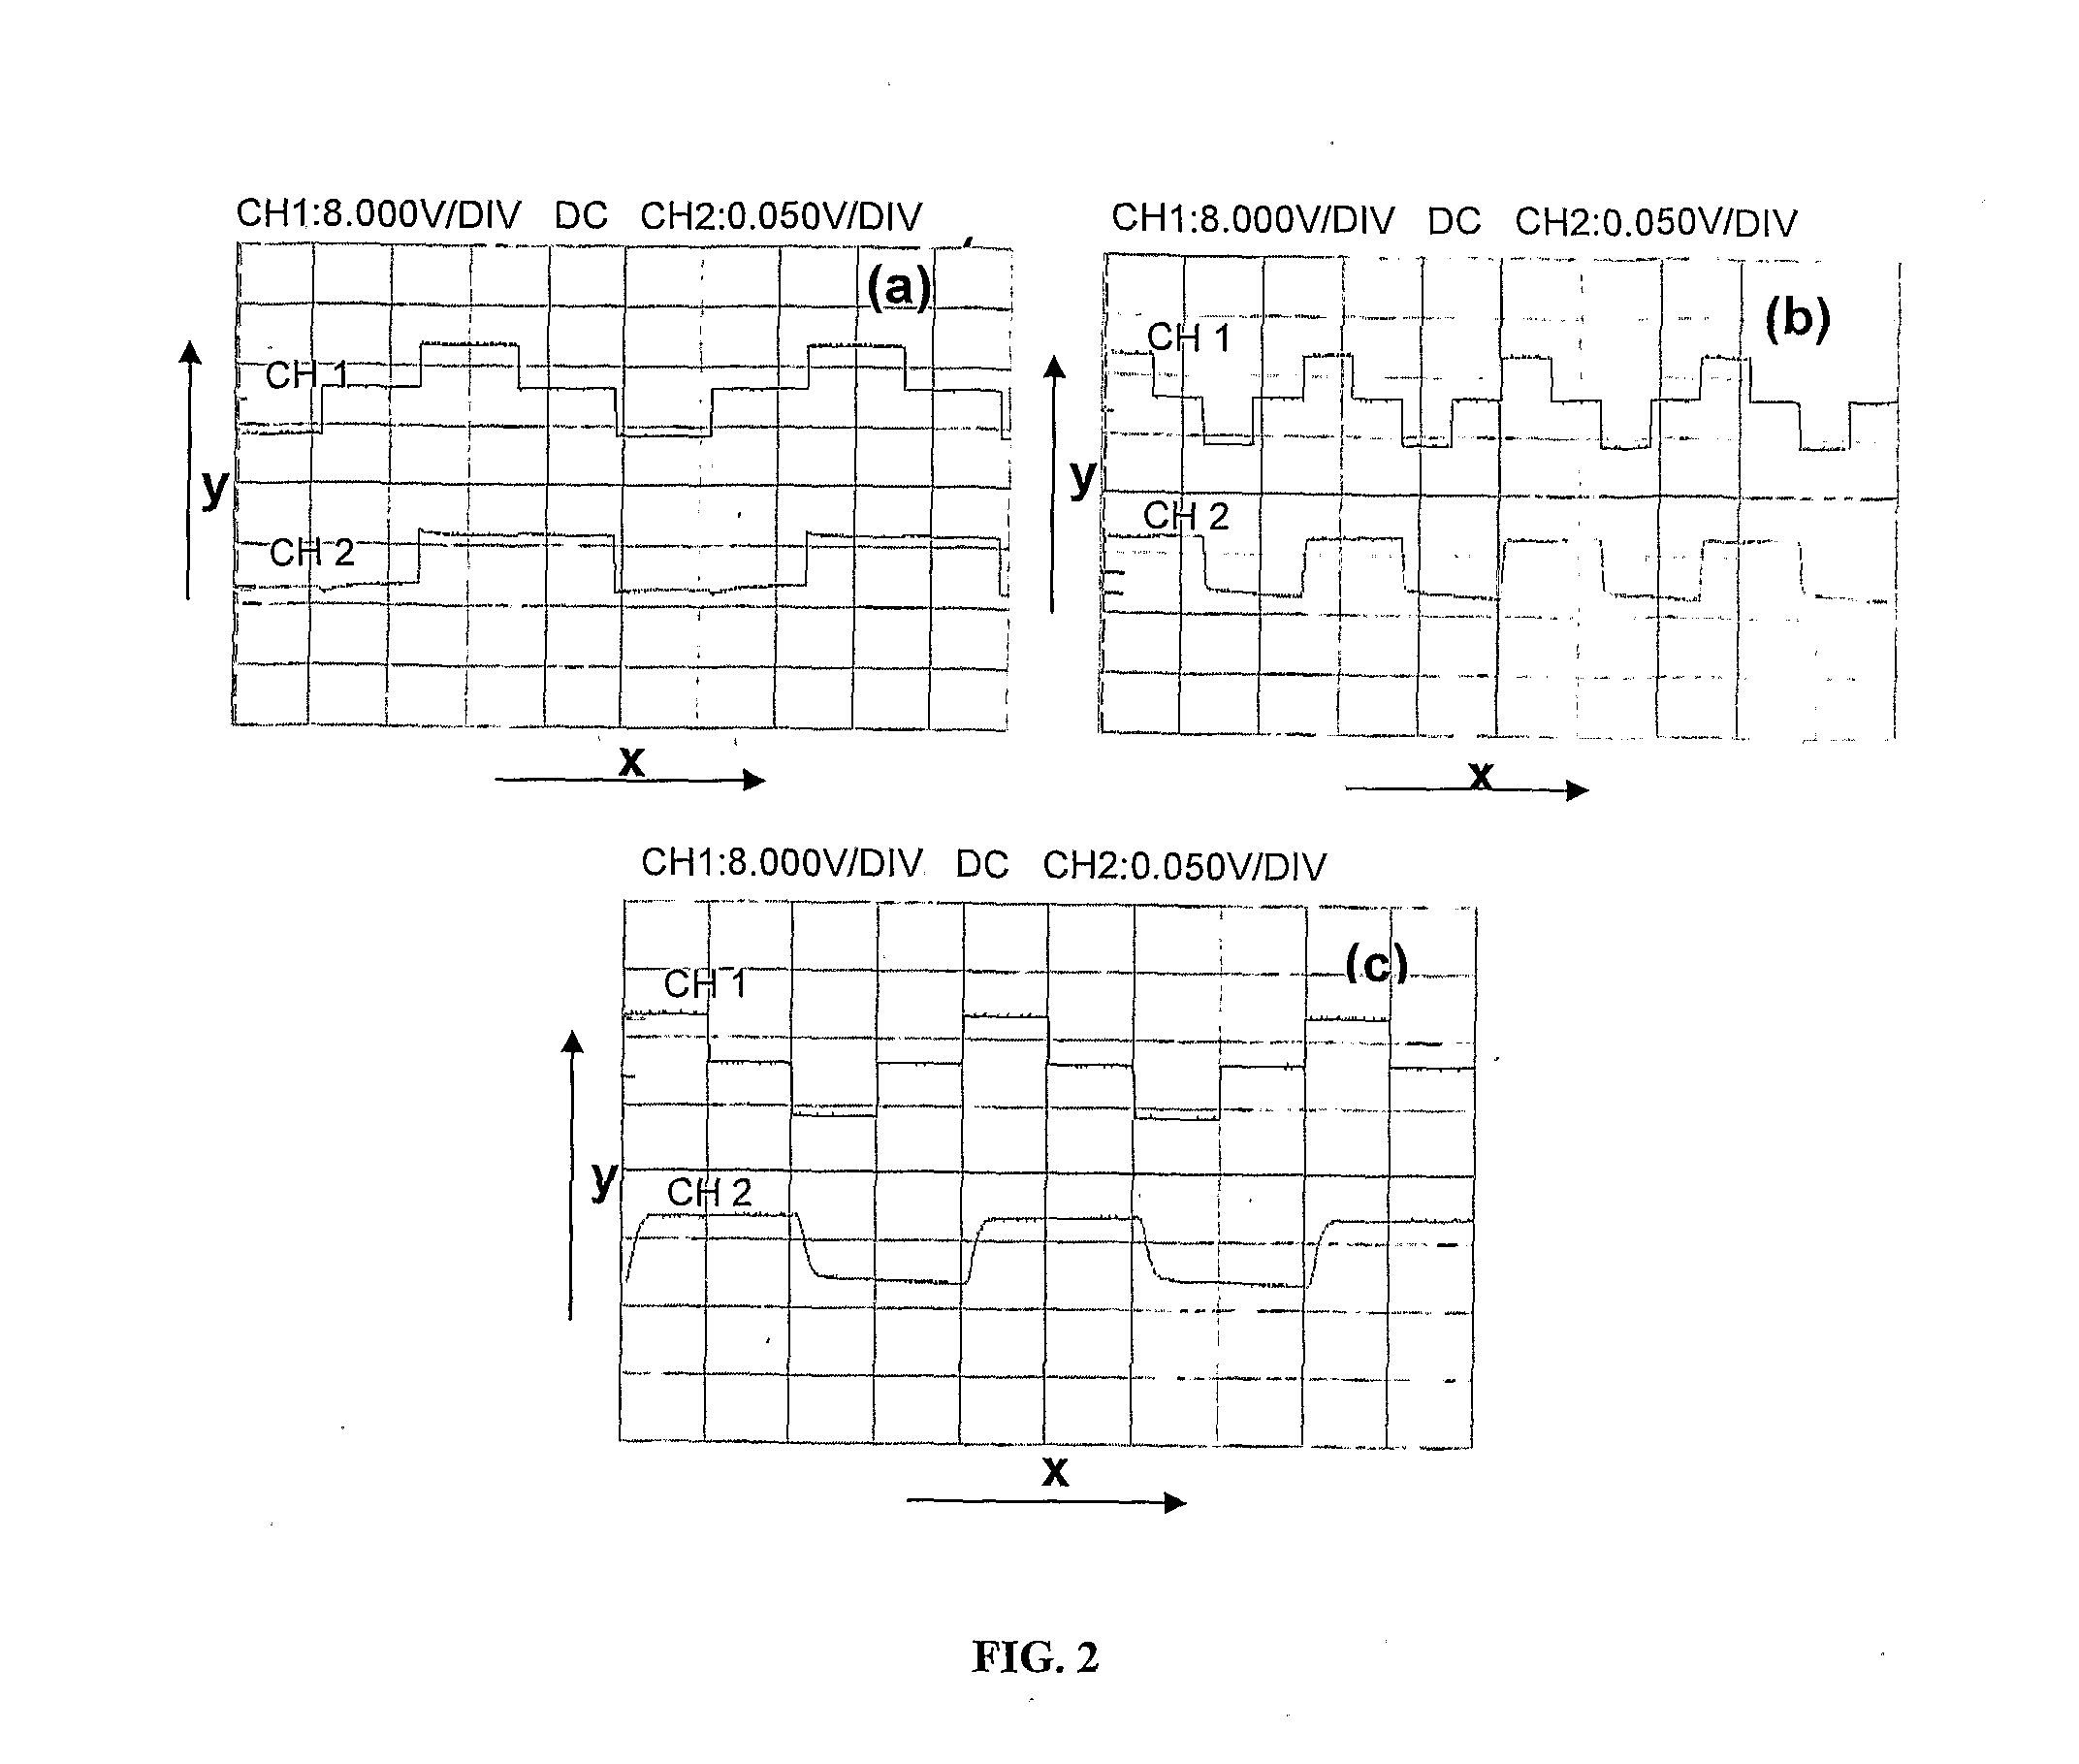 Optical memory device based on dhlfc material and method of preparing the same